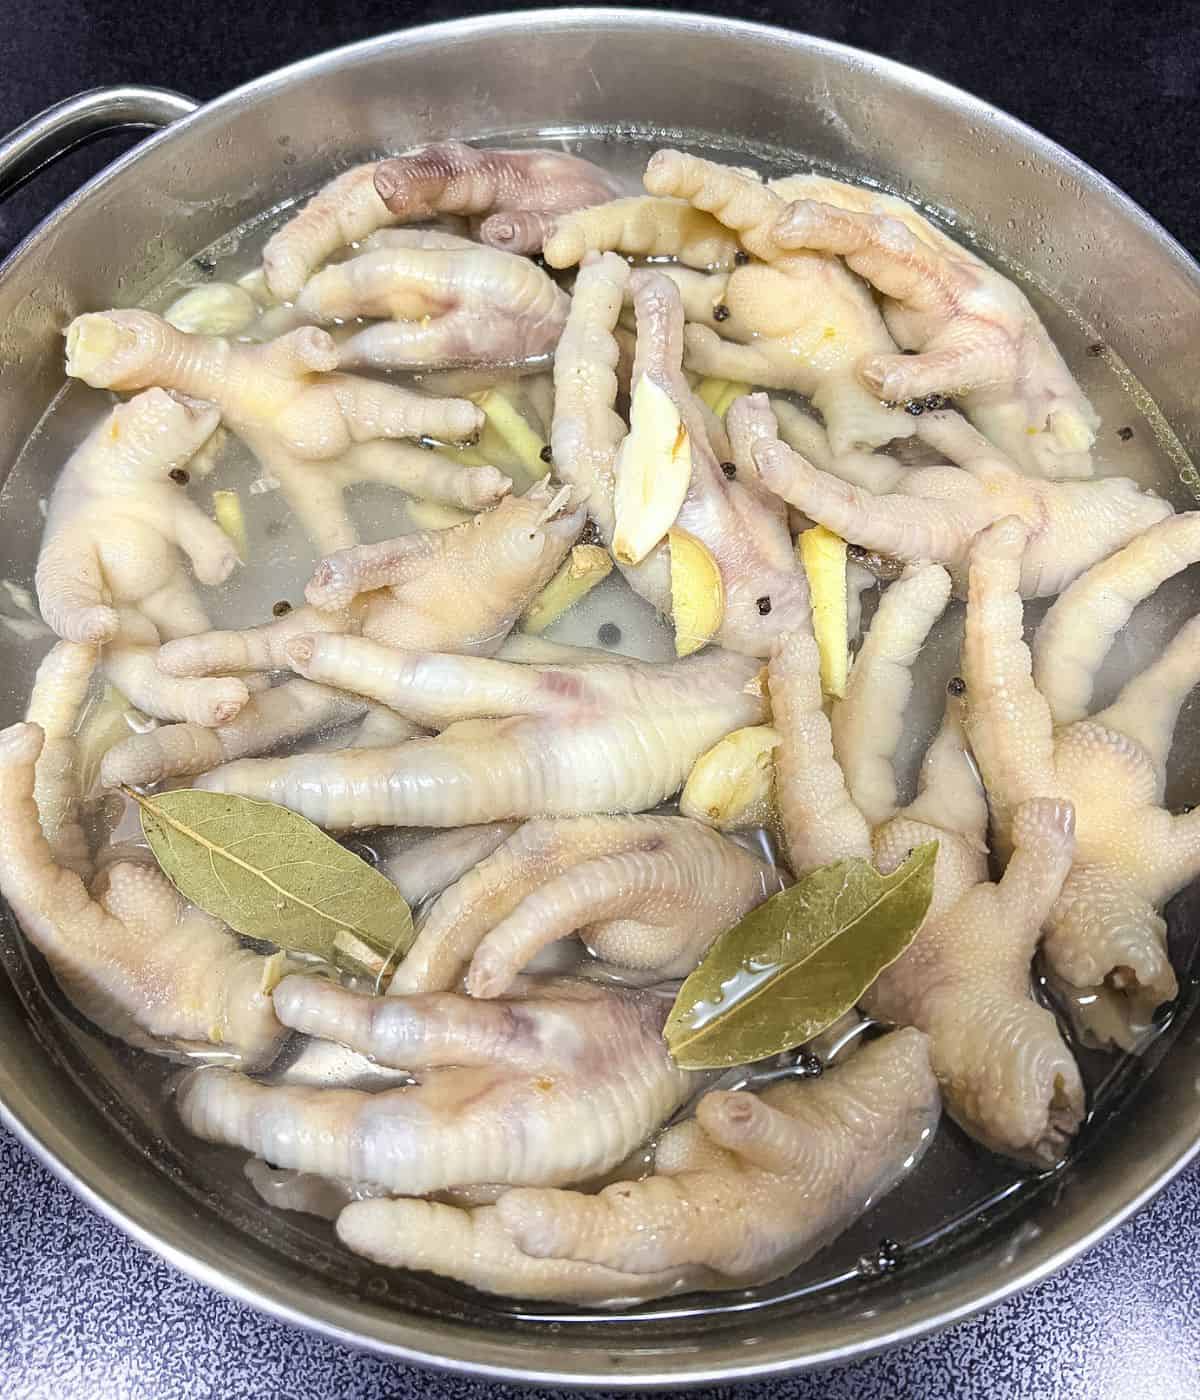 Boil the chicken feet to make it tender.